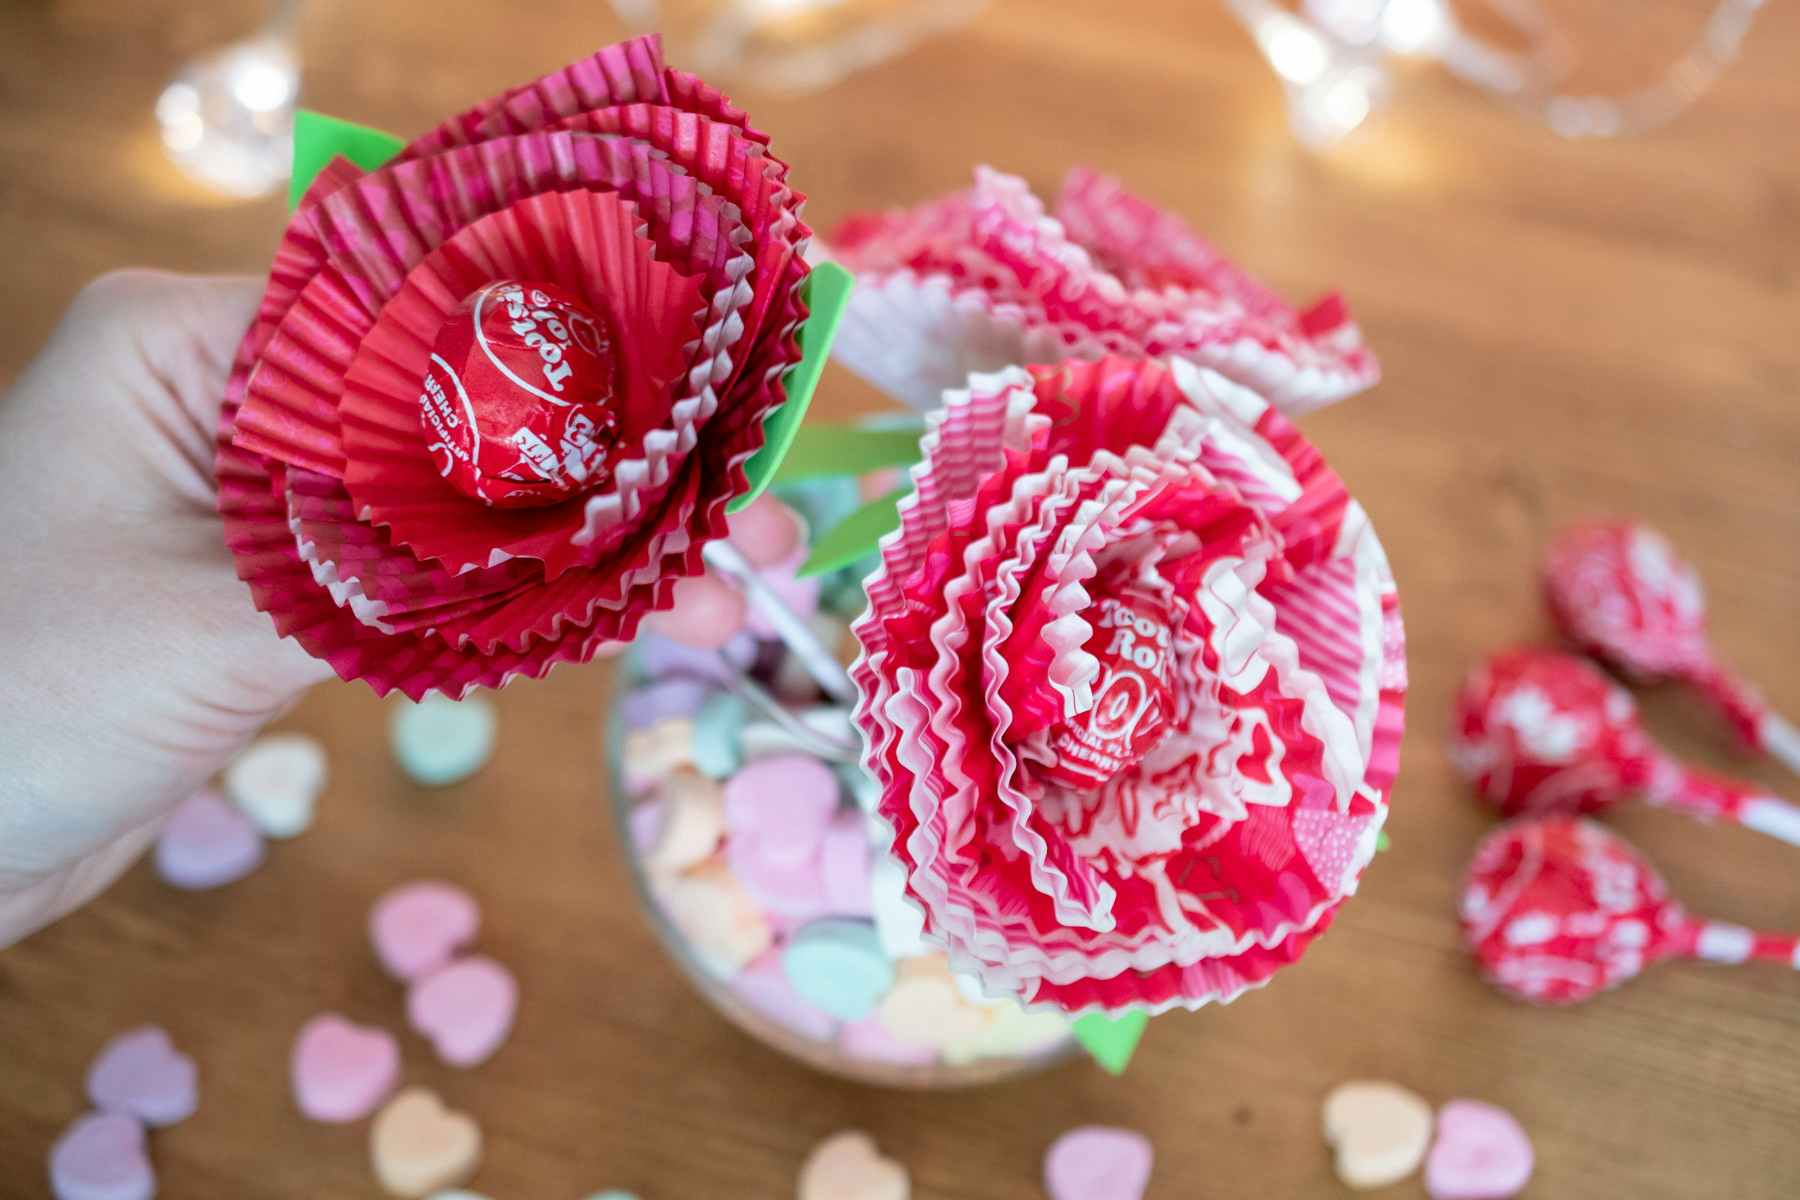 Best 13 Dollar Tree DIY Valentine's Day Gifts to Give - The Krazy